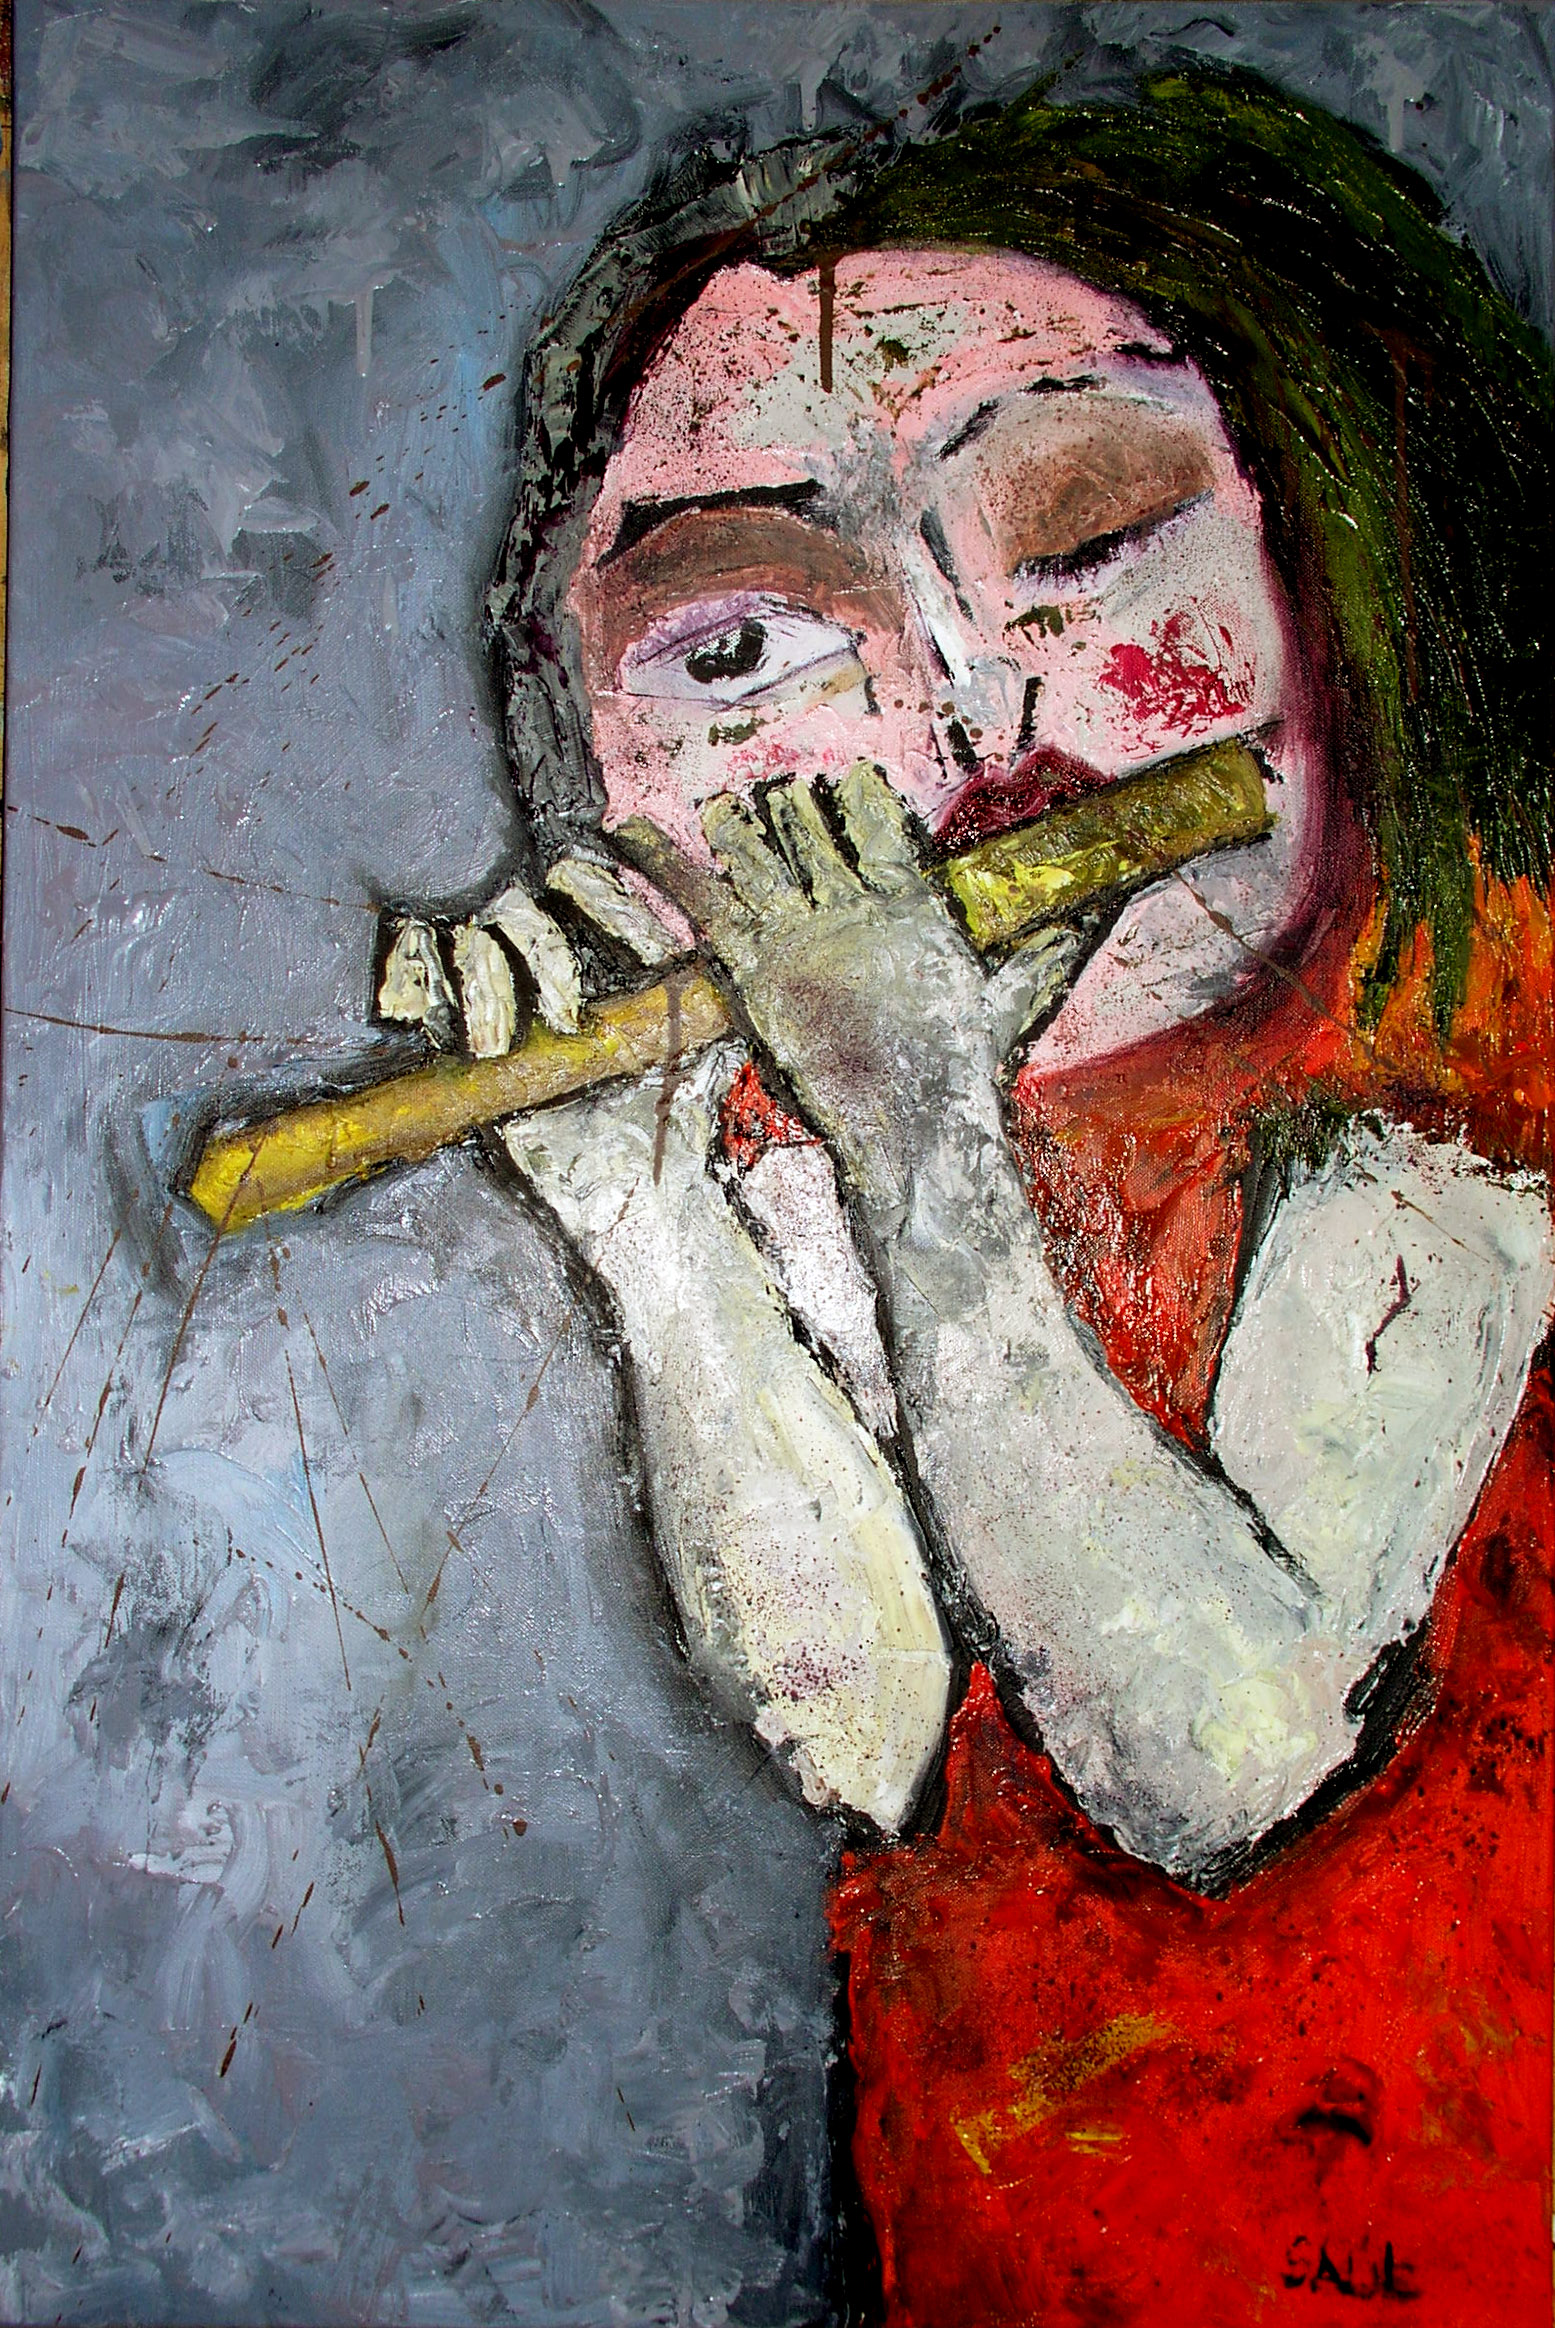 Piccolo Girl Oil on Canvas 36 x 24 in 2009